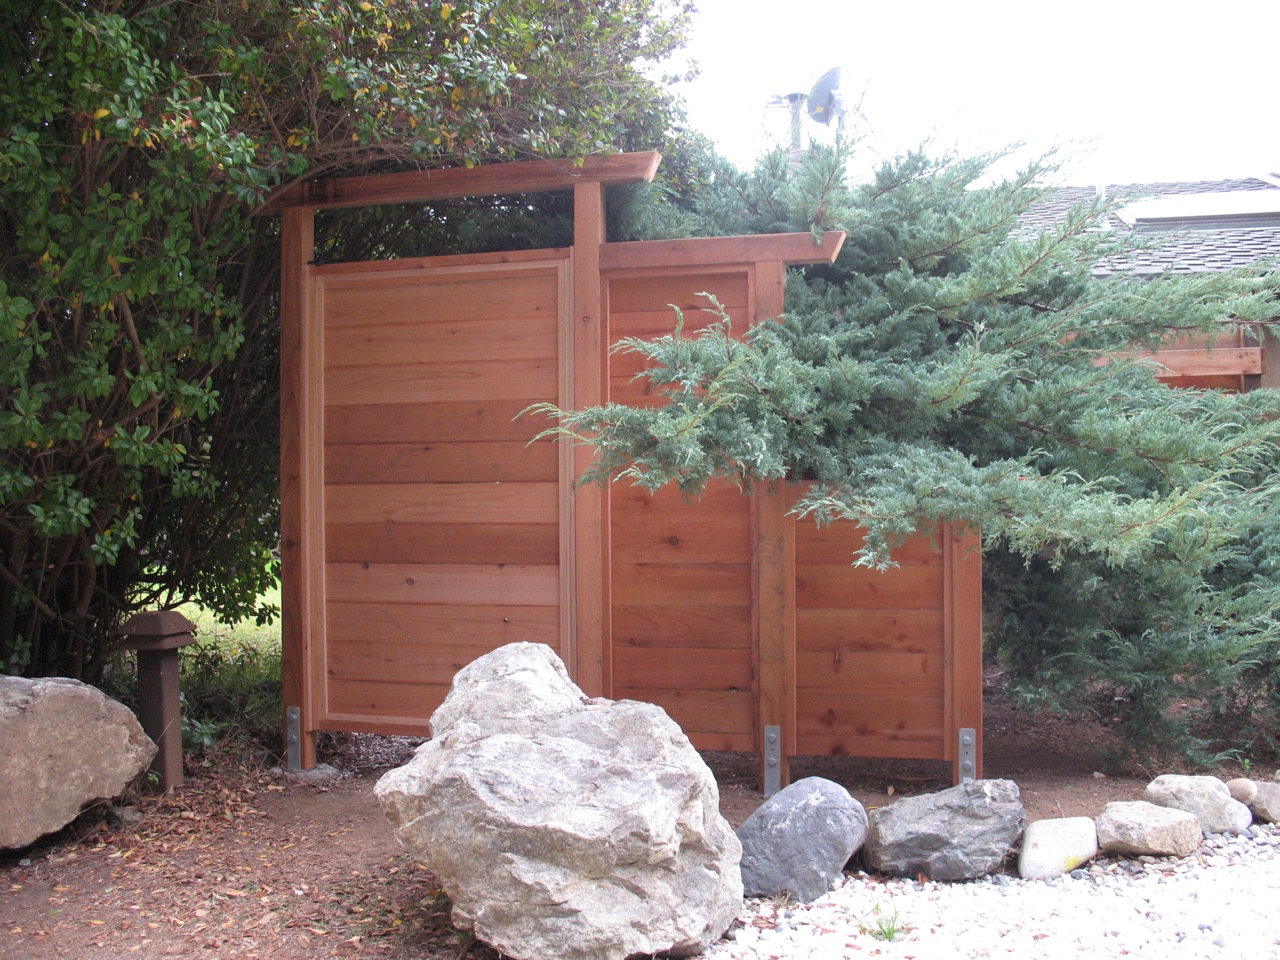 Japanese style privacy fence